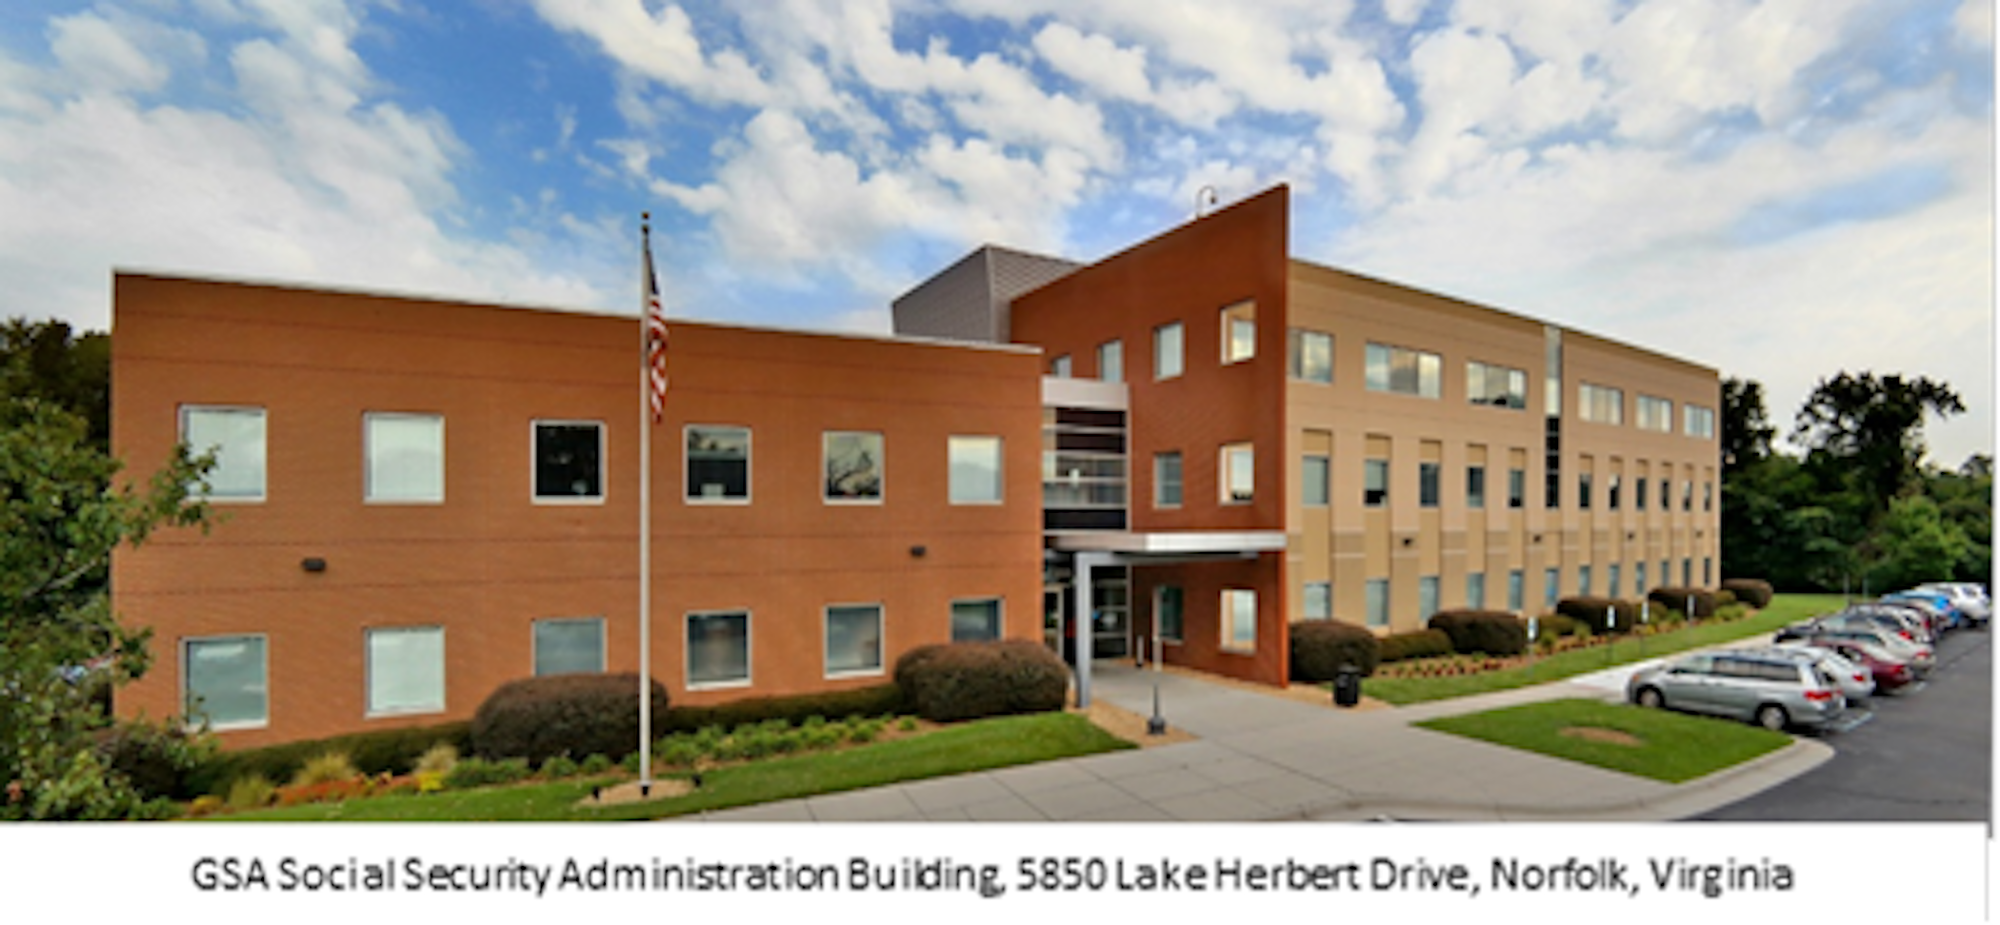 COURTESY PHOTO — HC Government Realty Trust acquired this three-story Social Security Administration building in Norfolk, Va., in March 2017 for $14.5 million